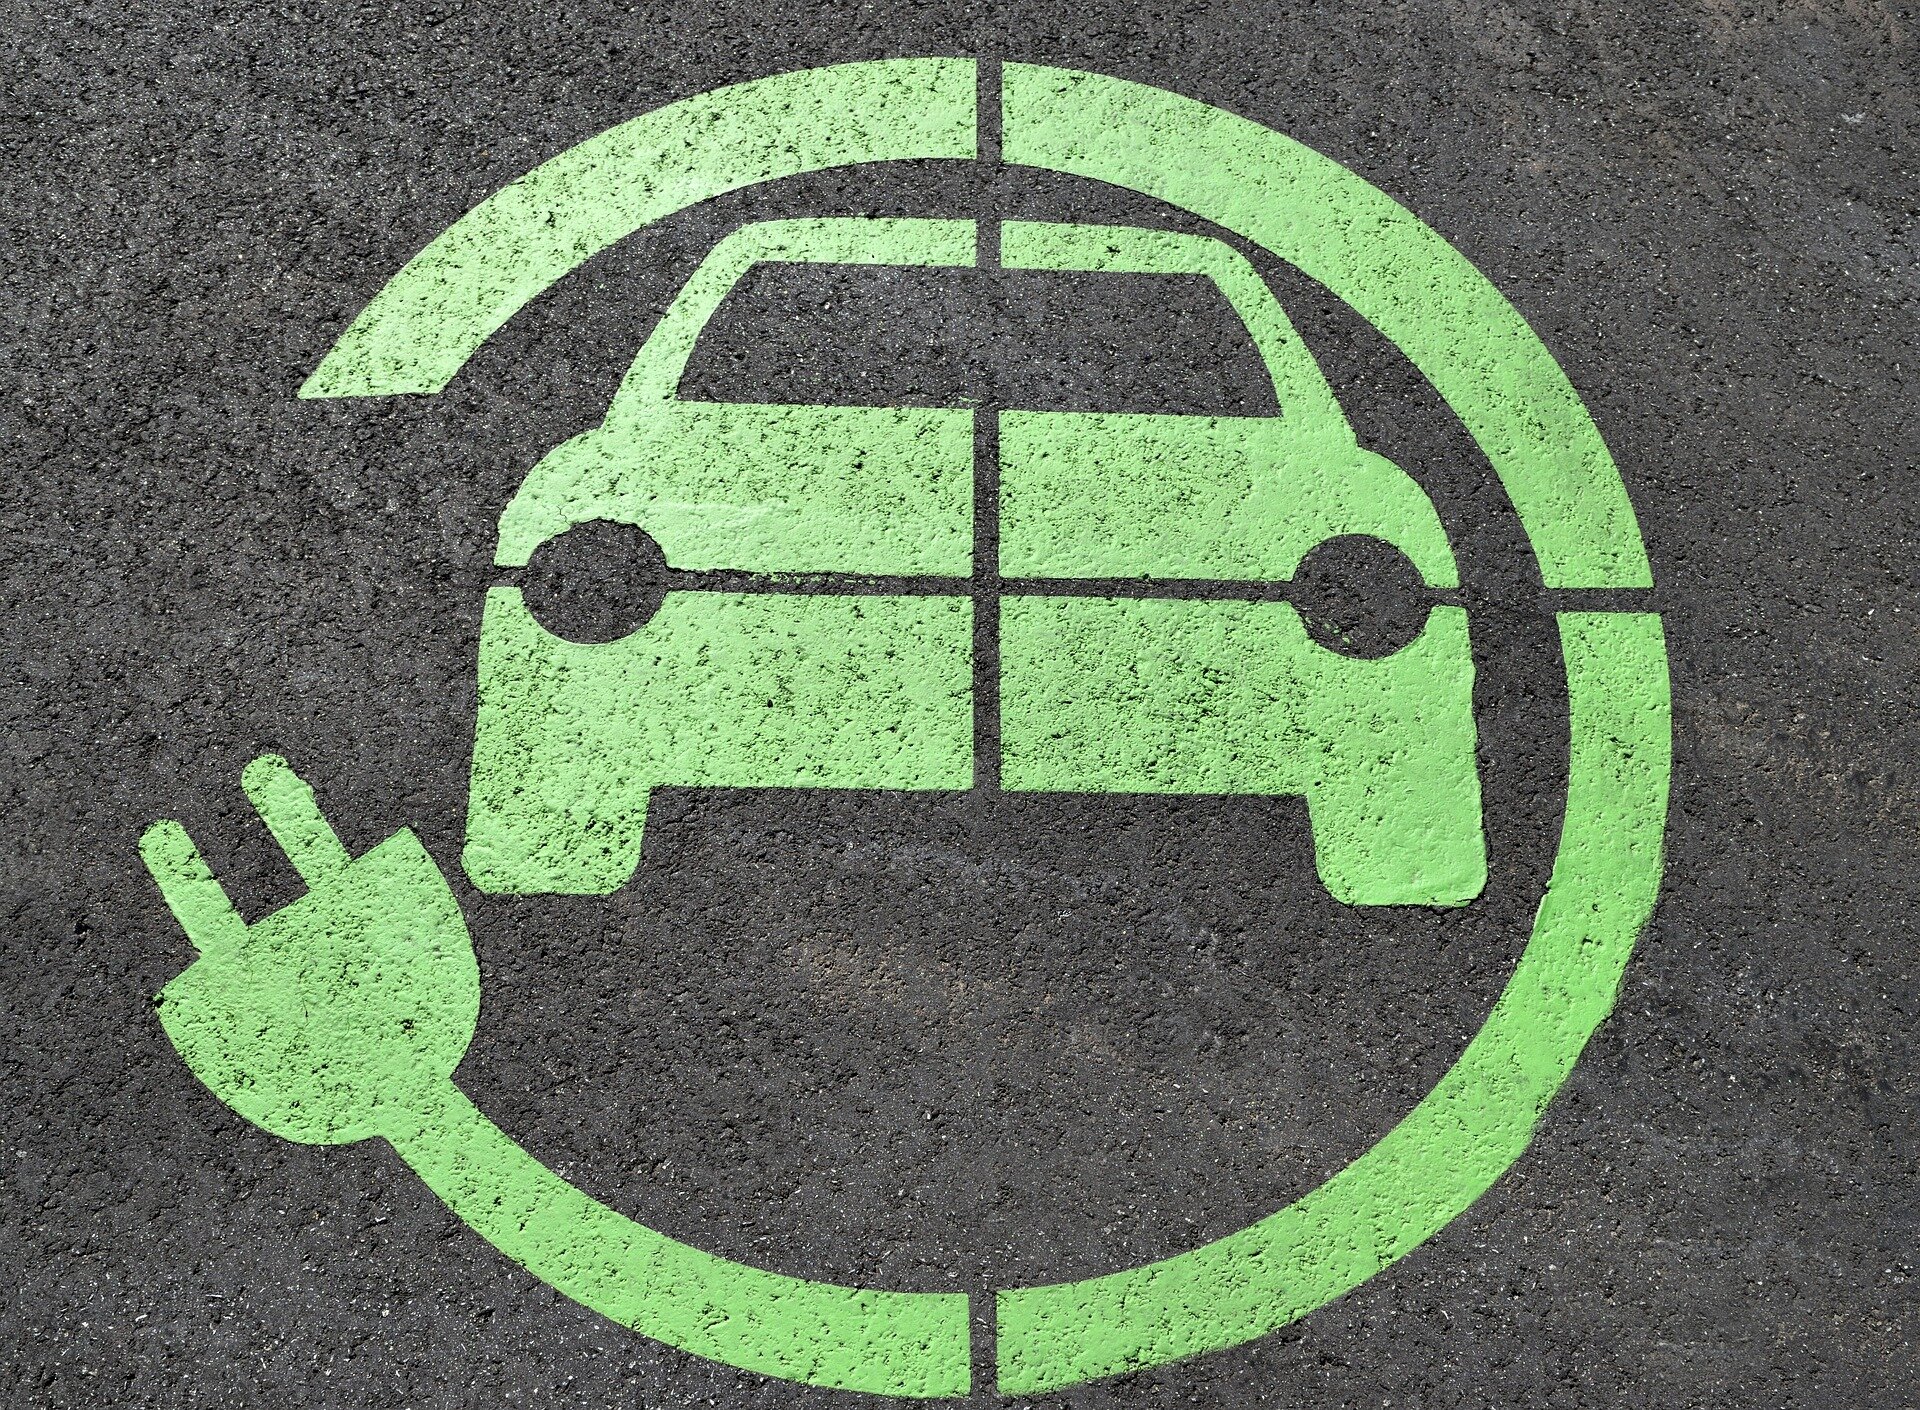 Inadequate charging networks could thwart EV adoption goals